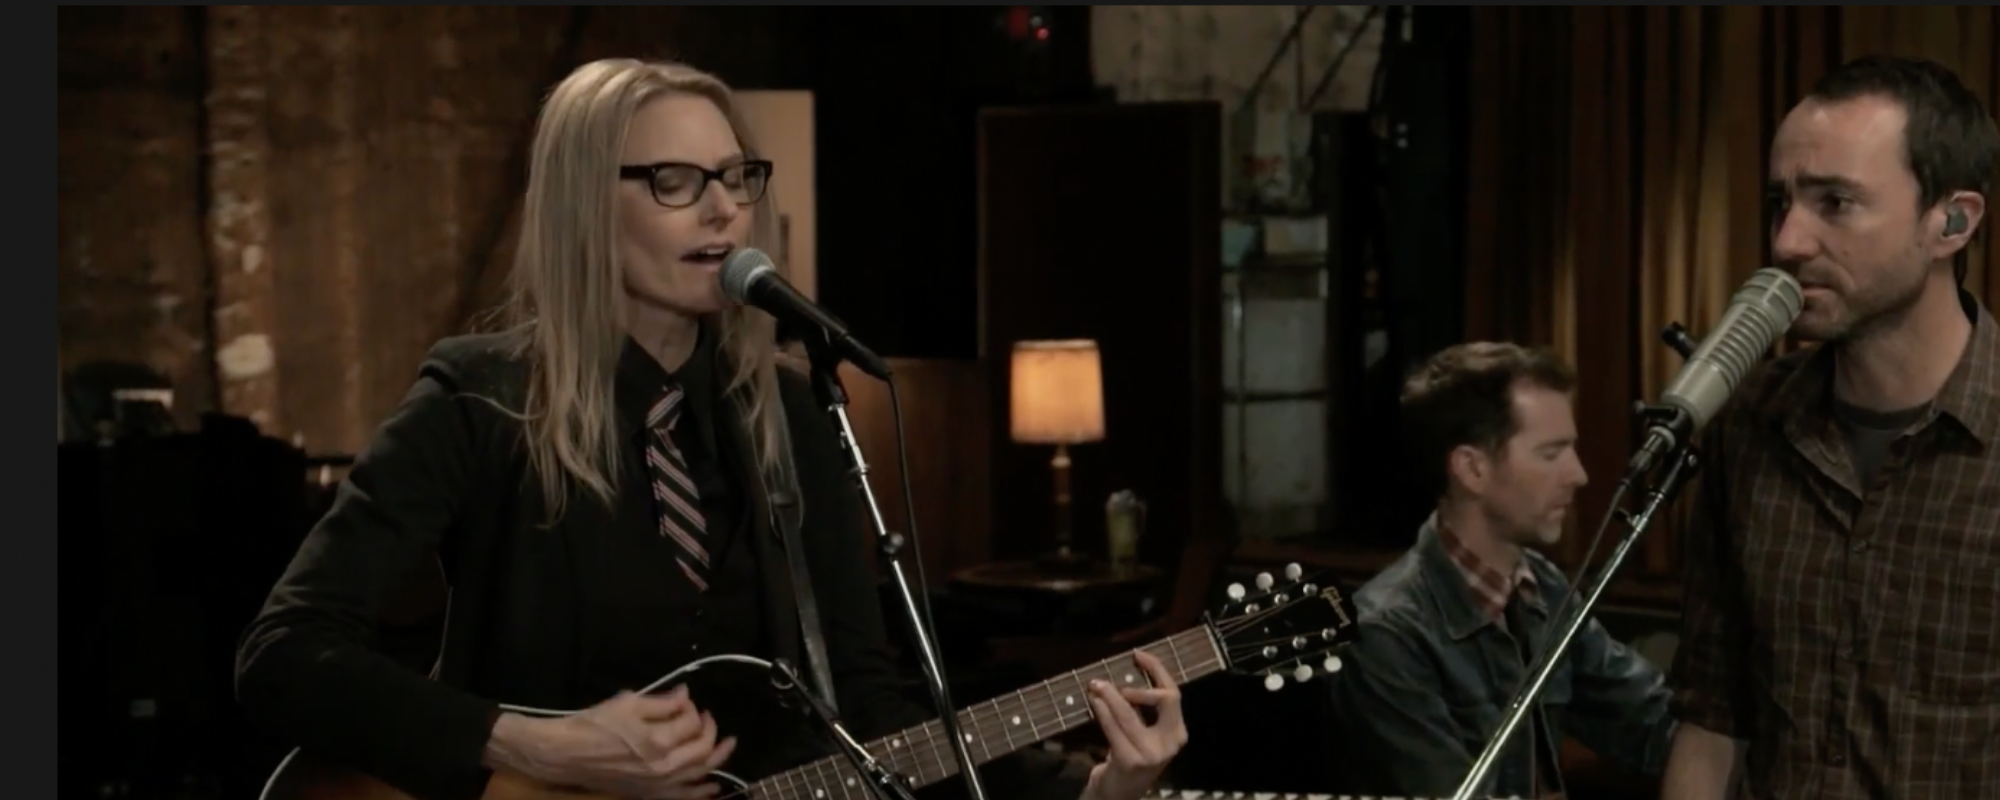 Video Premiere: Exclusive Clip of Aimee Mann Performing “Living A Lie” On Nigel Godrich’s ‘From The Basement’ Series